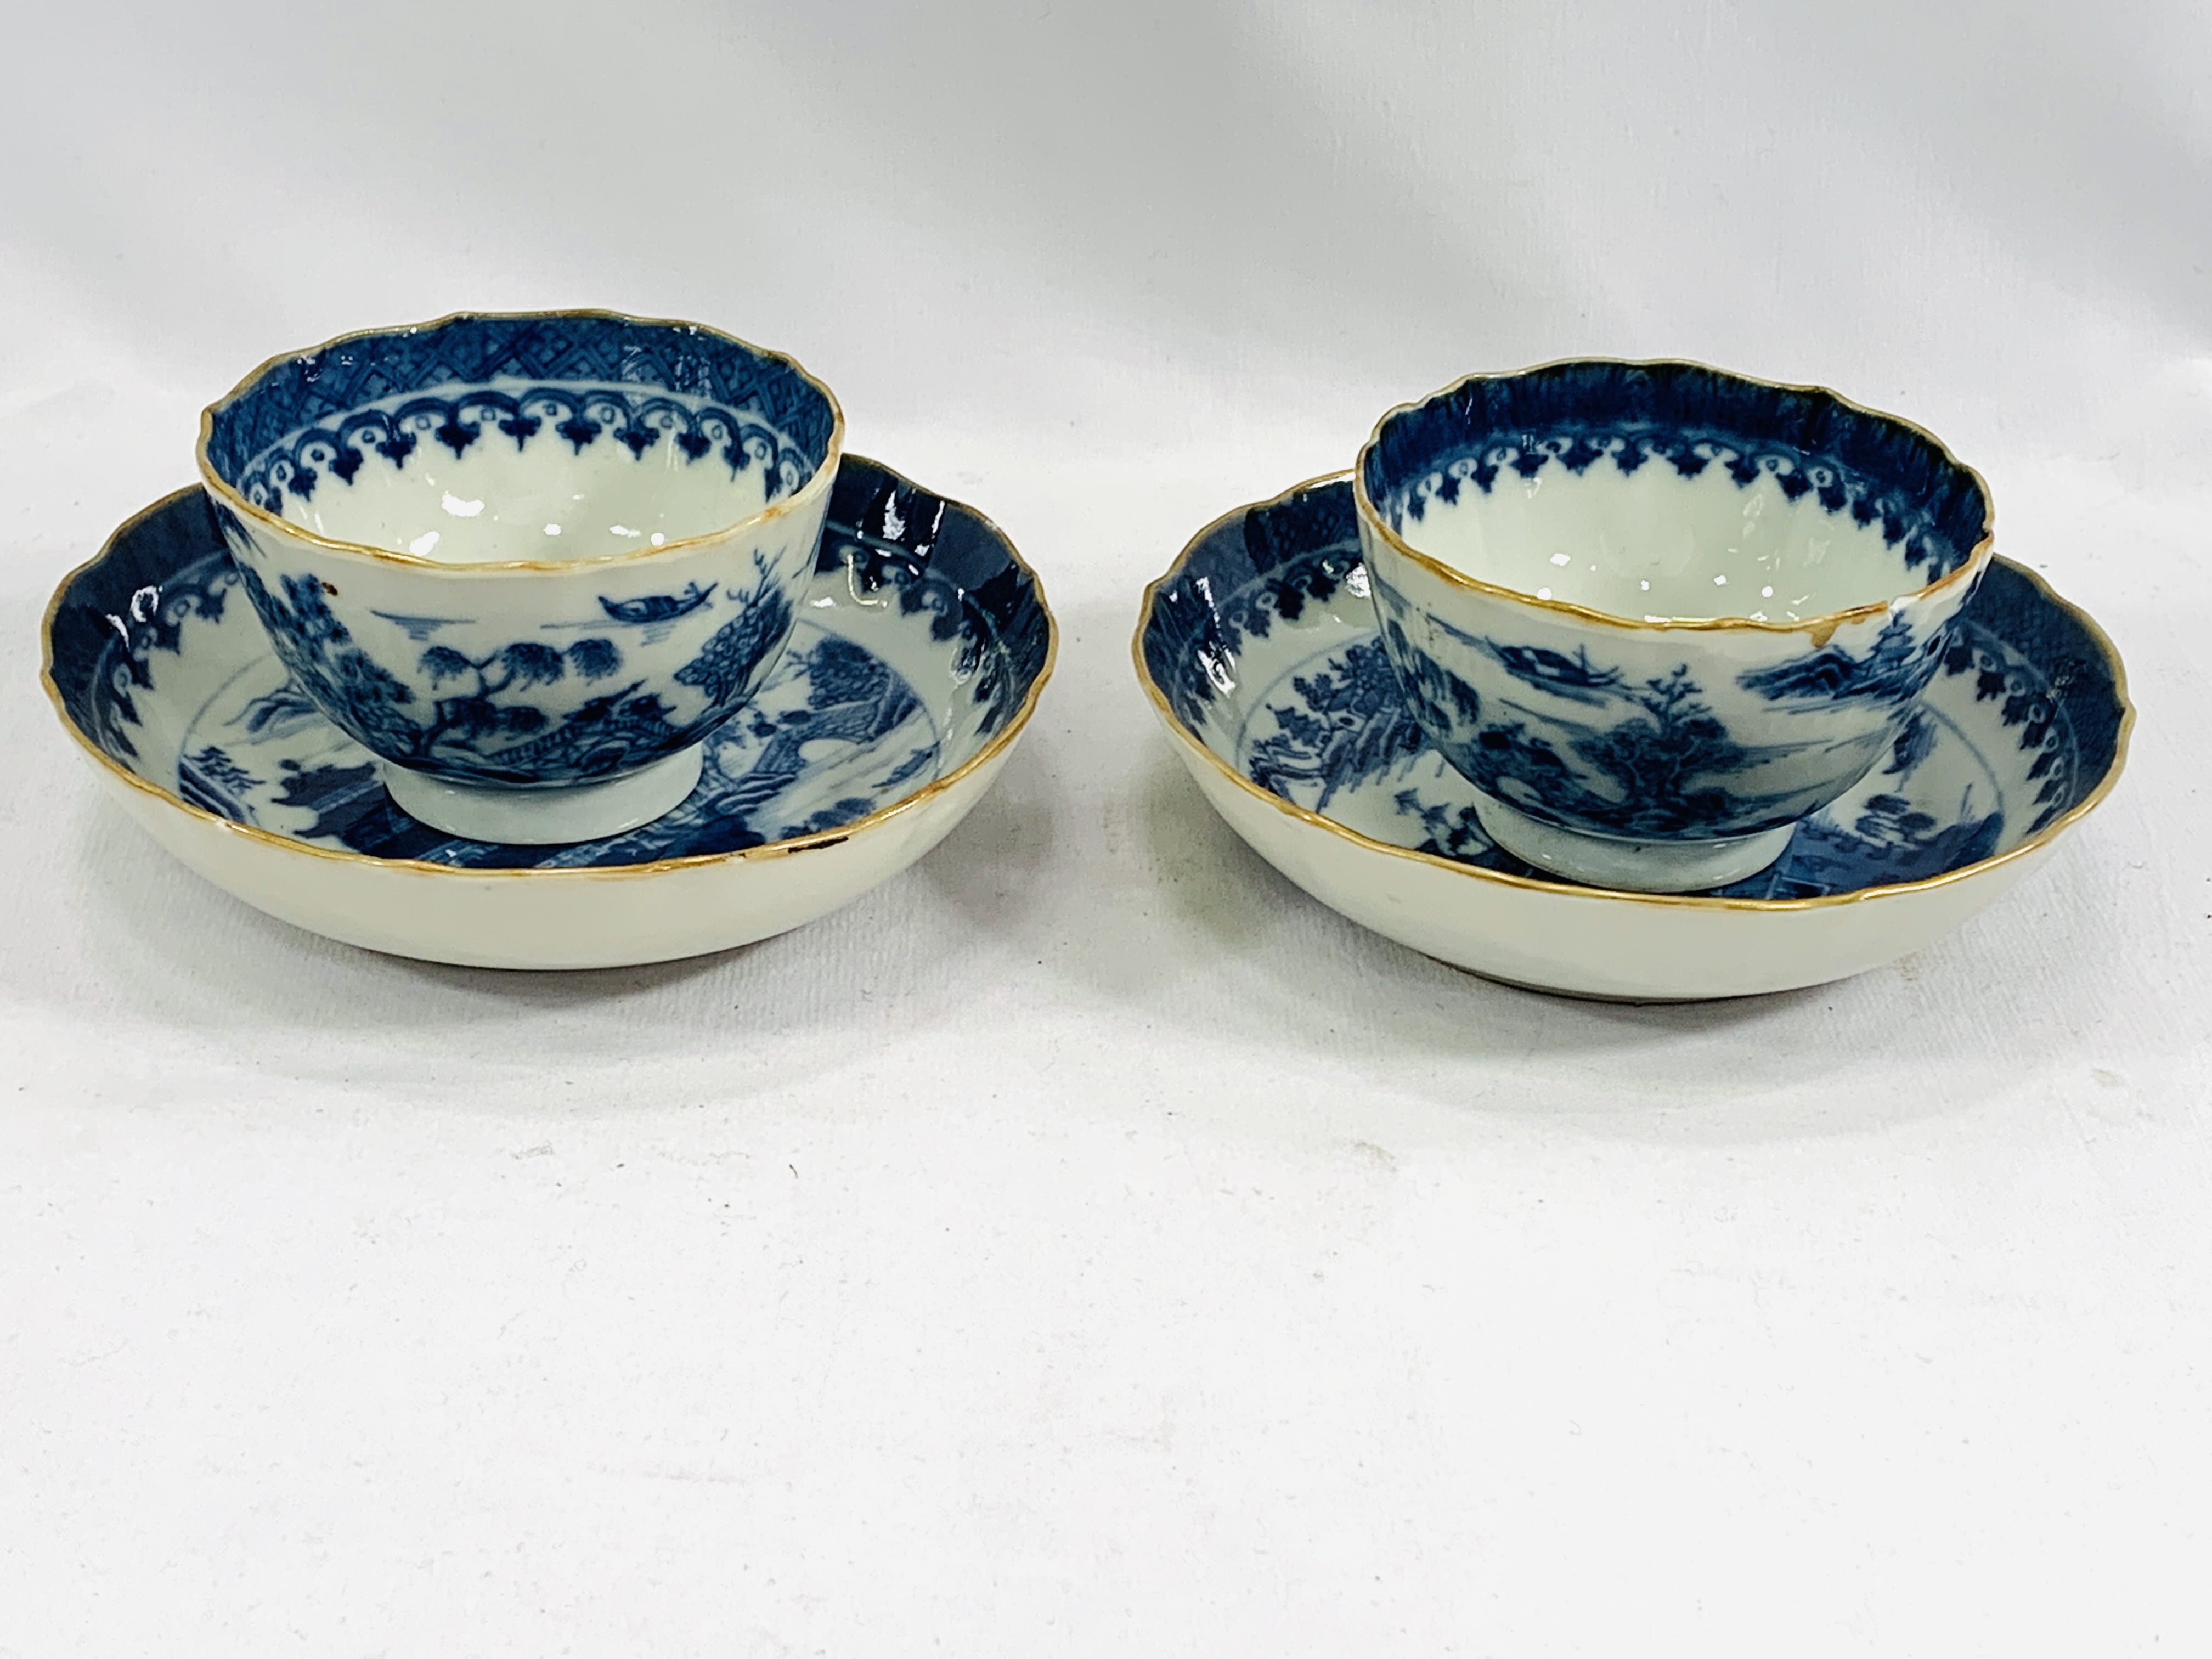 Two blue and white tea bowls and saucers